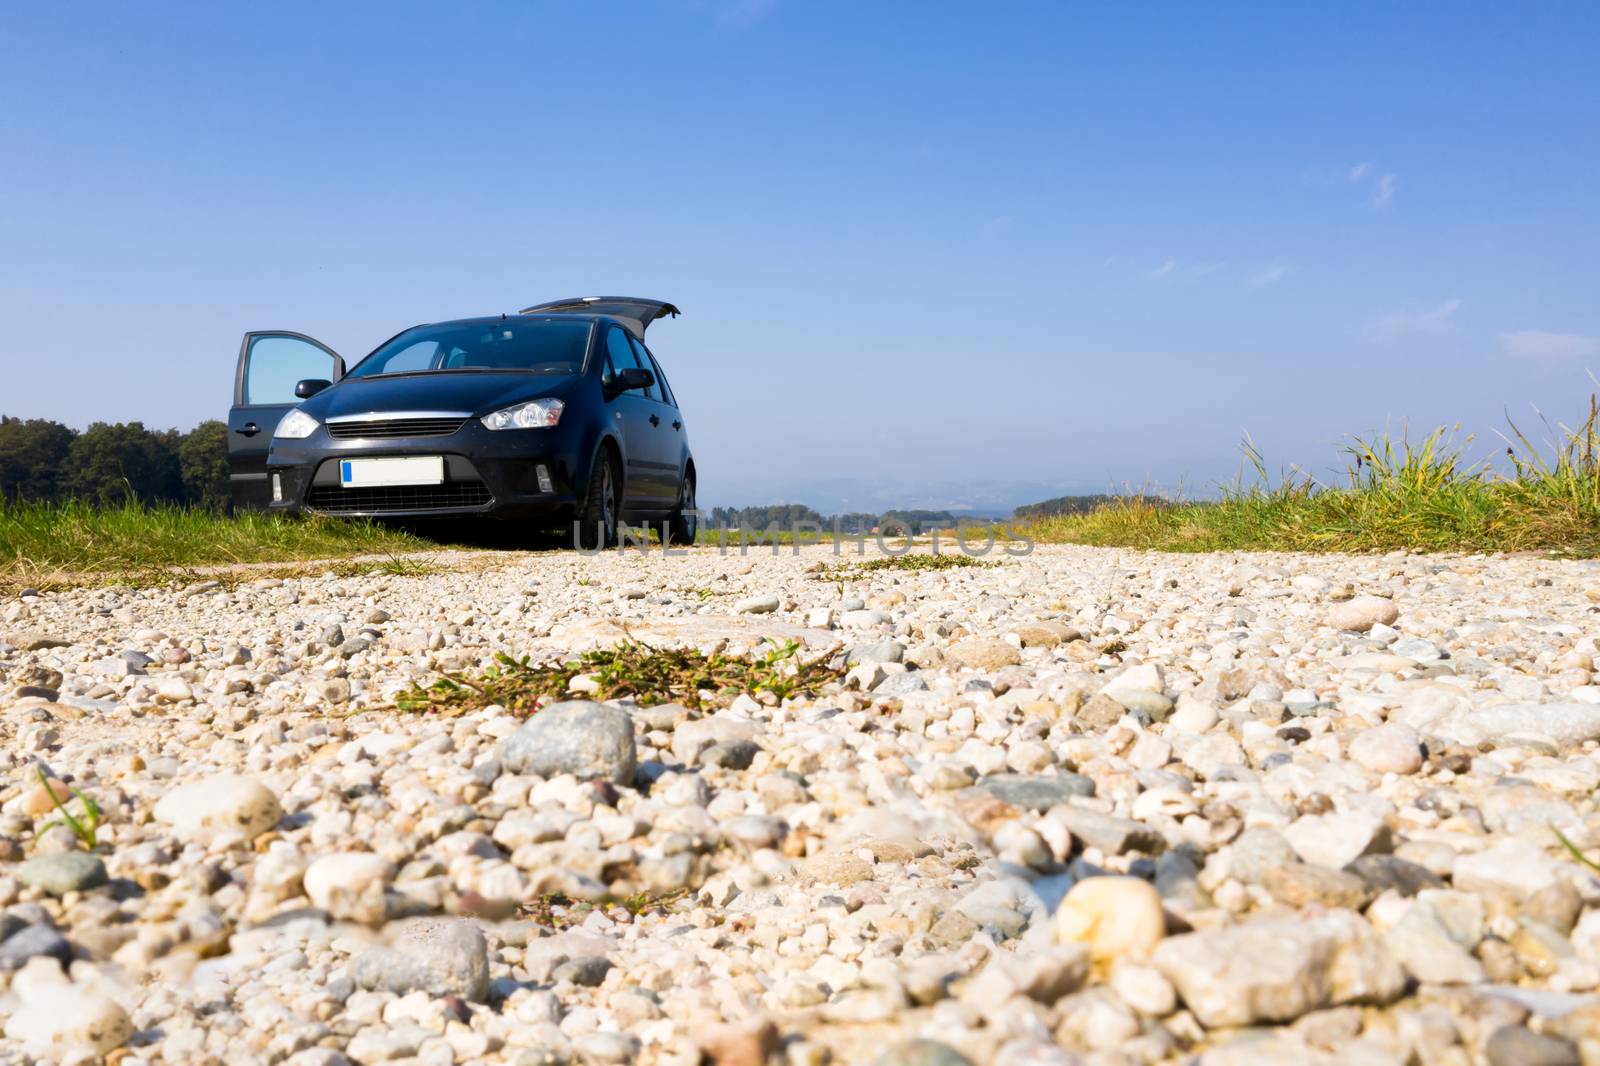 Black van parked on gravel road, low angle, copyspace by asafaric